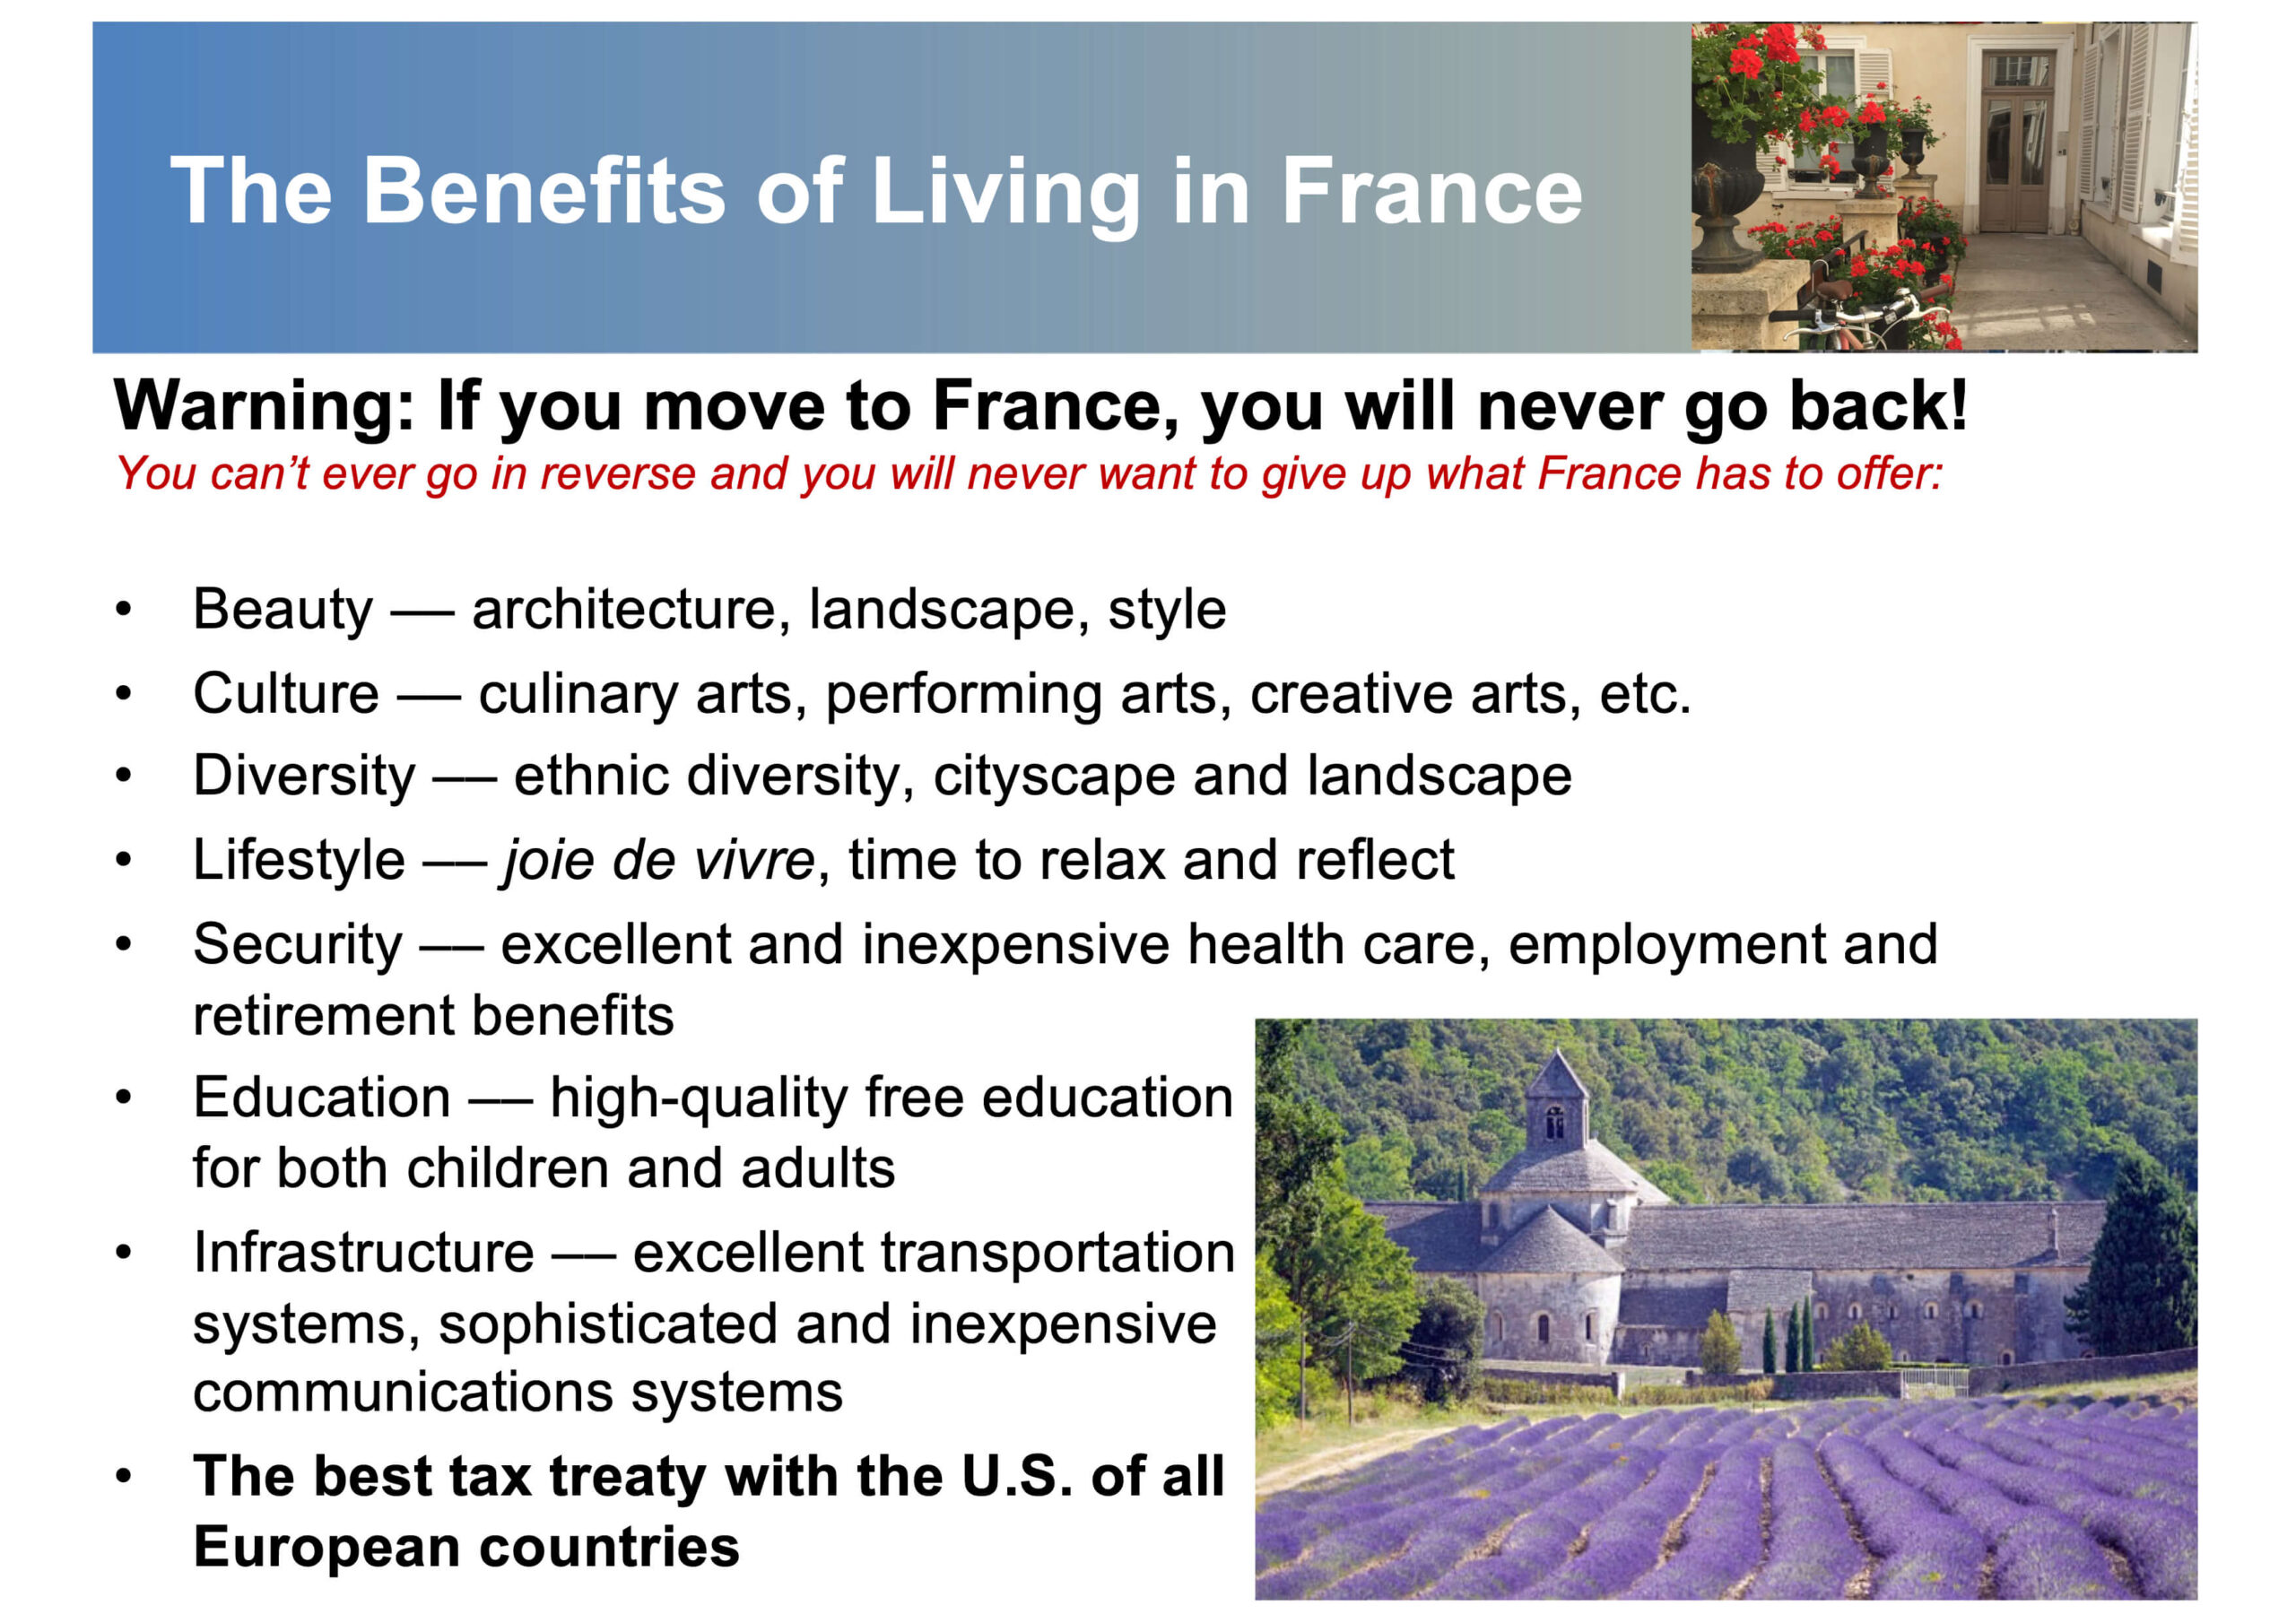 Slides from Adrian Leeds' conference presentation on the benefits of living in France